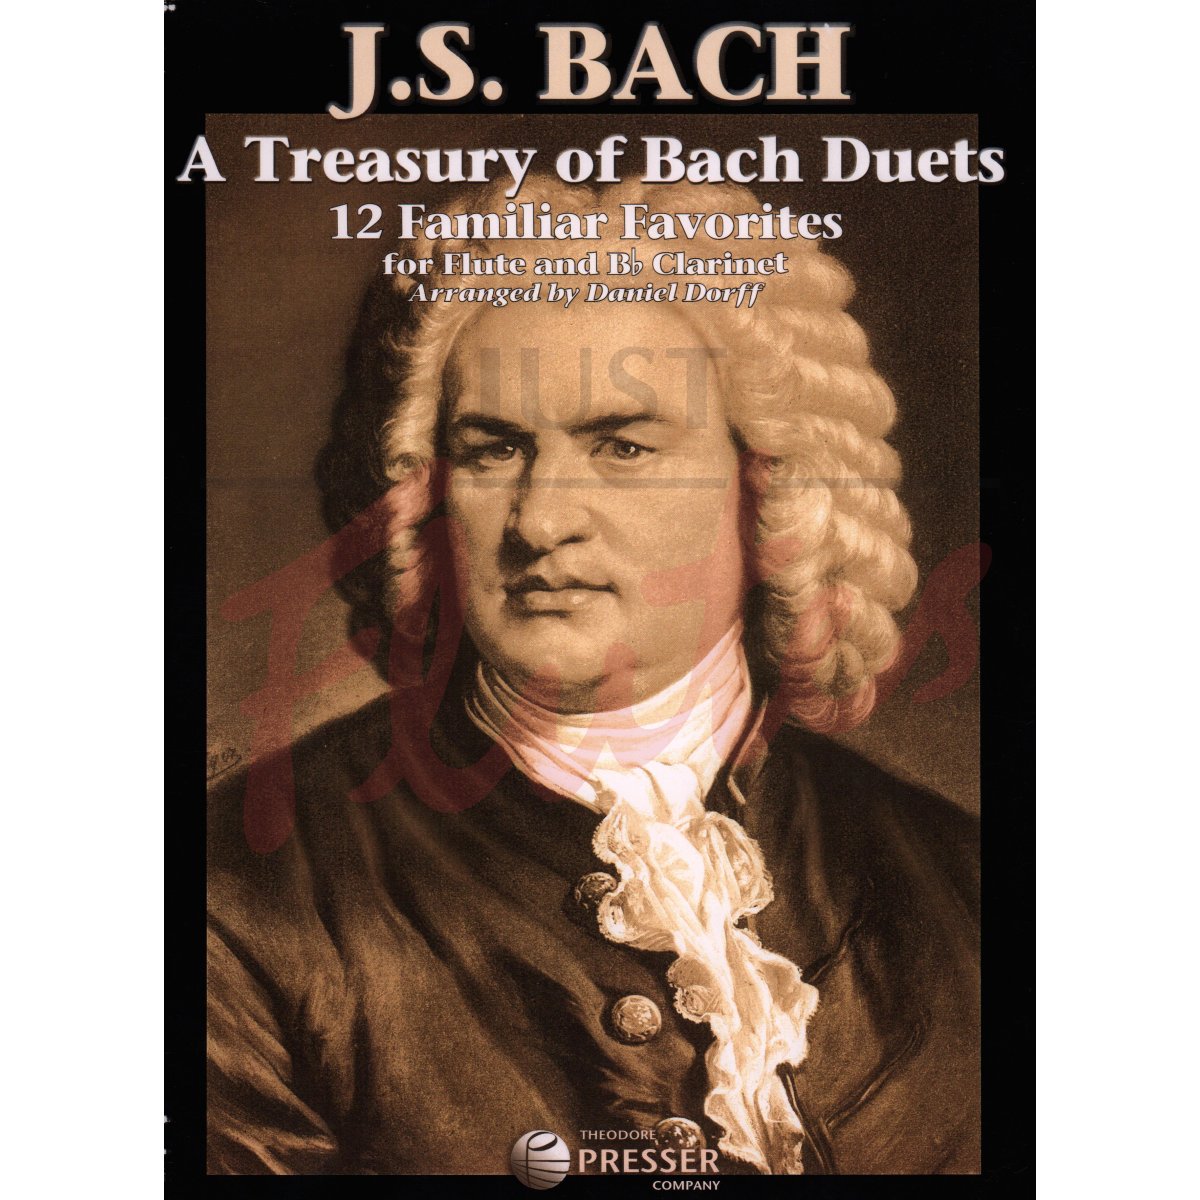 A Treasury of Bach Duets for Flute and Clarinet